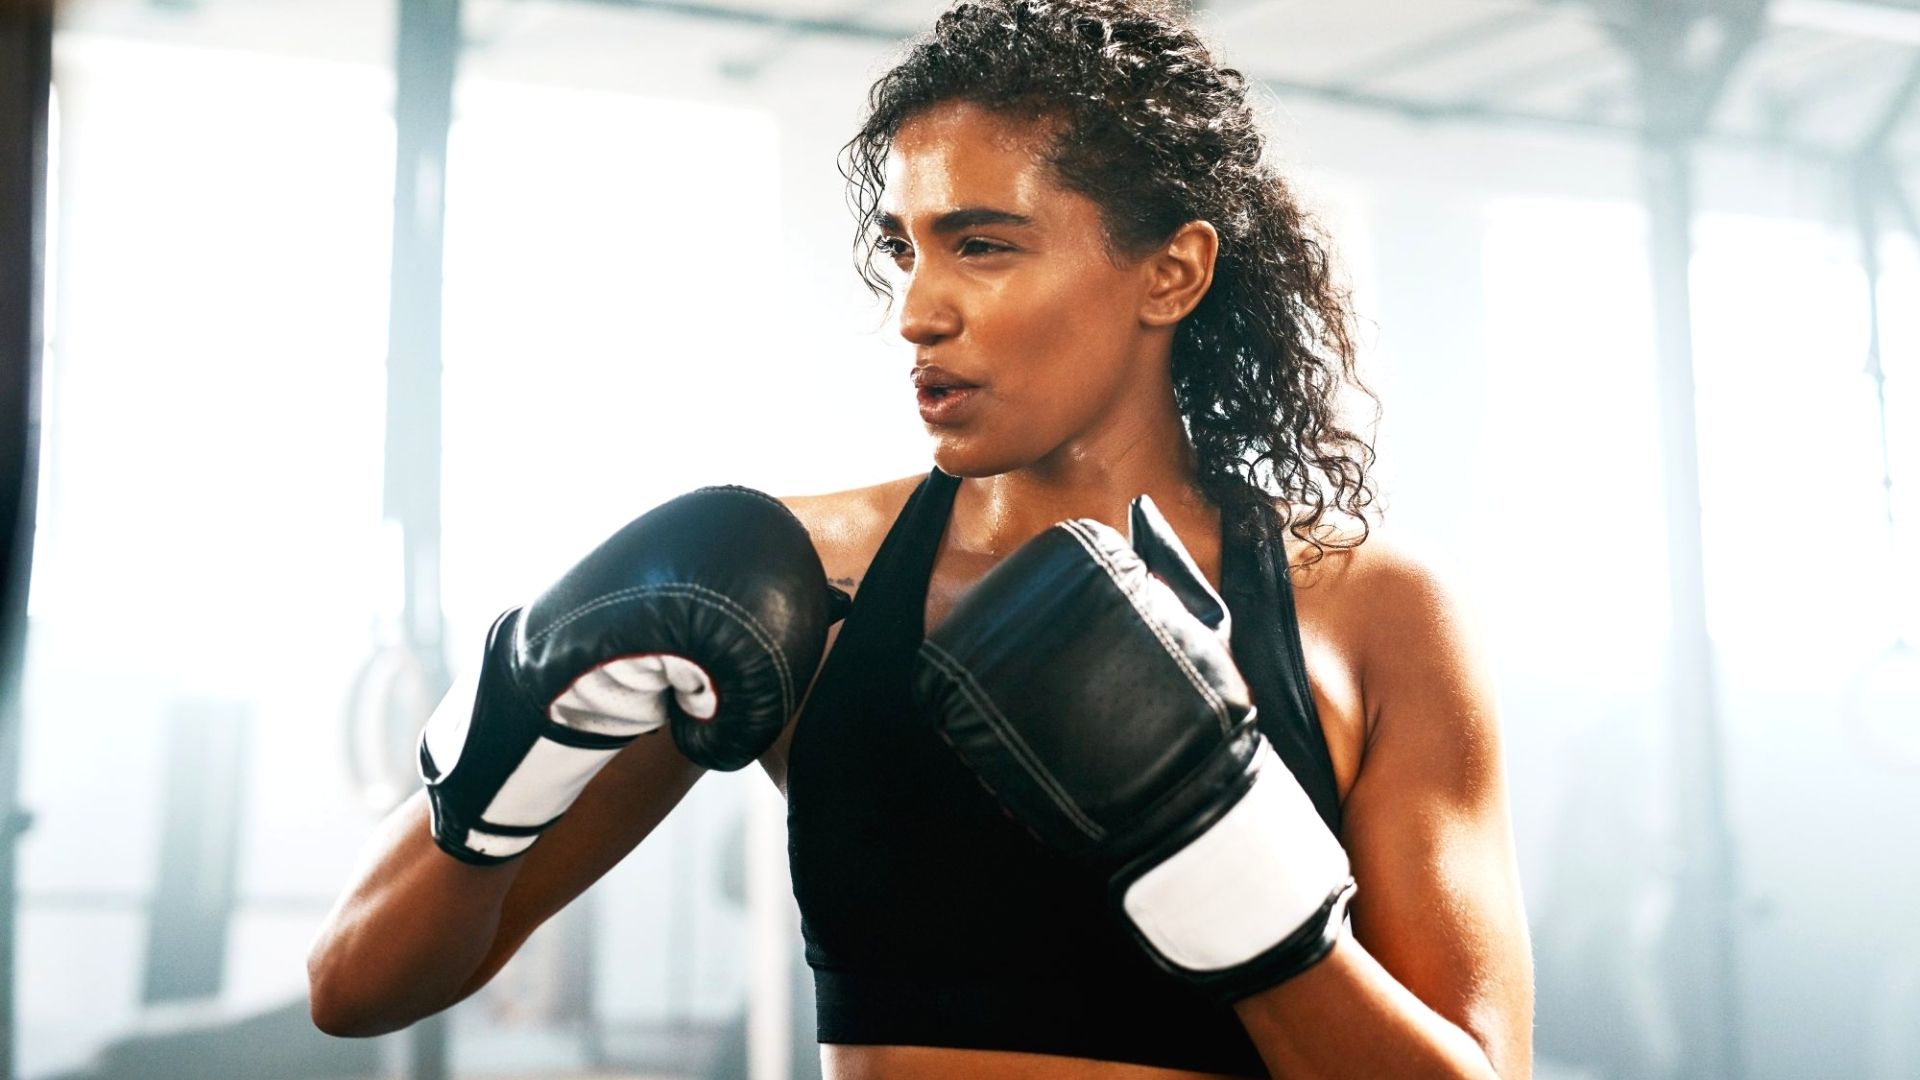 Woman Practising Boxing With Gloves